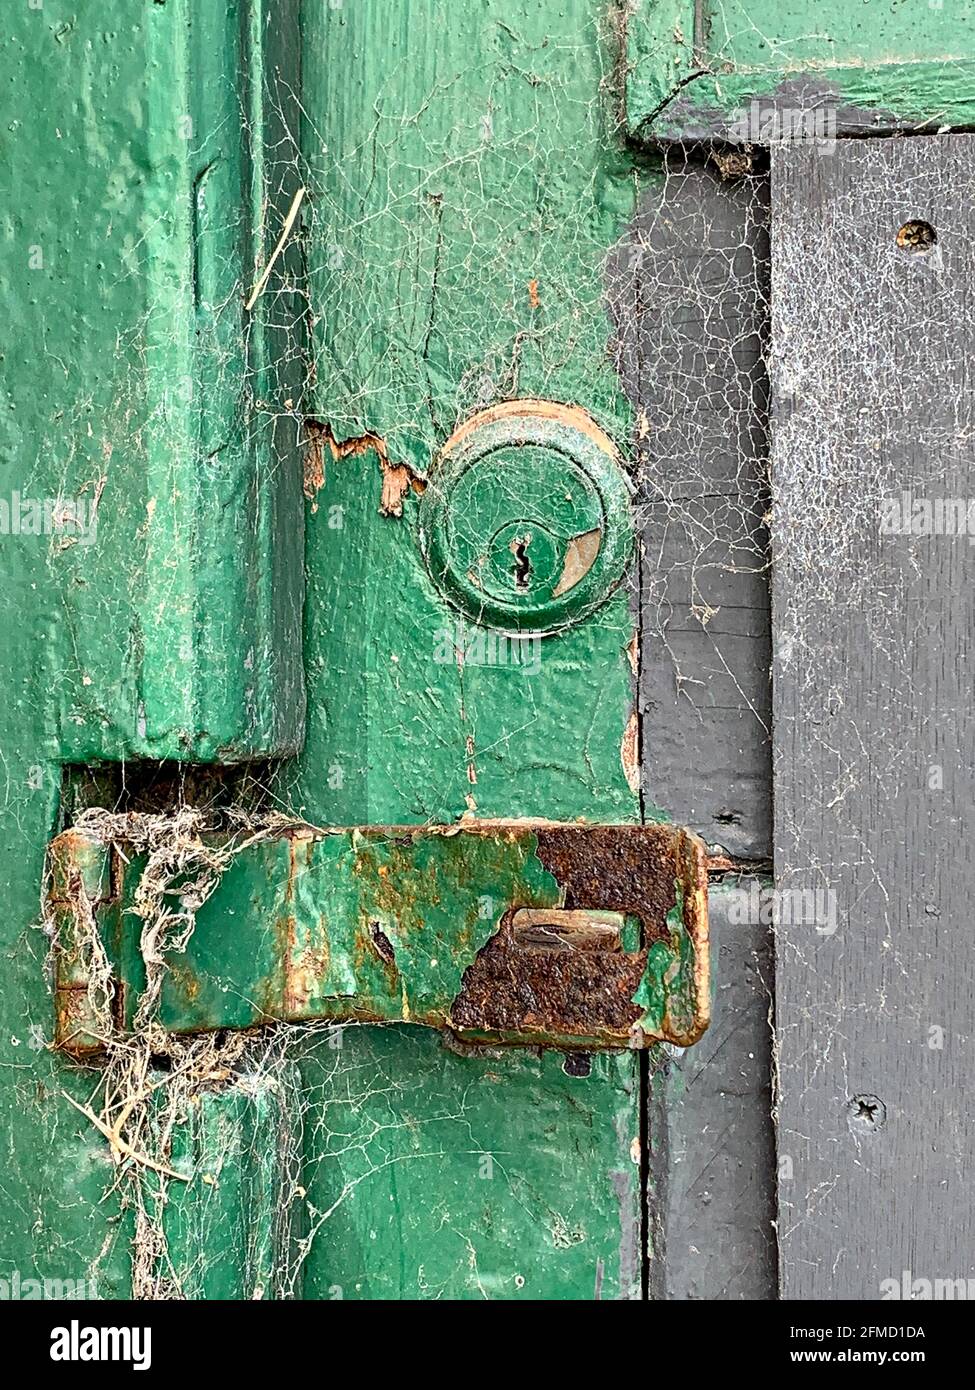 Green painted wooden doorway with security hasp, staple and key lock rim cylinder Stock Photo